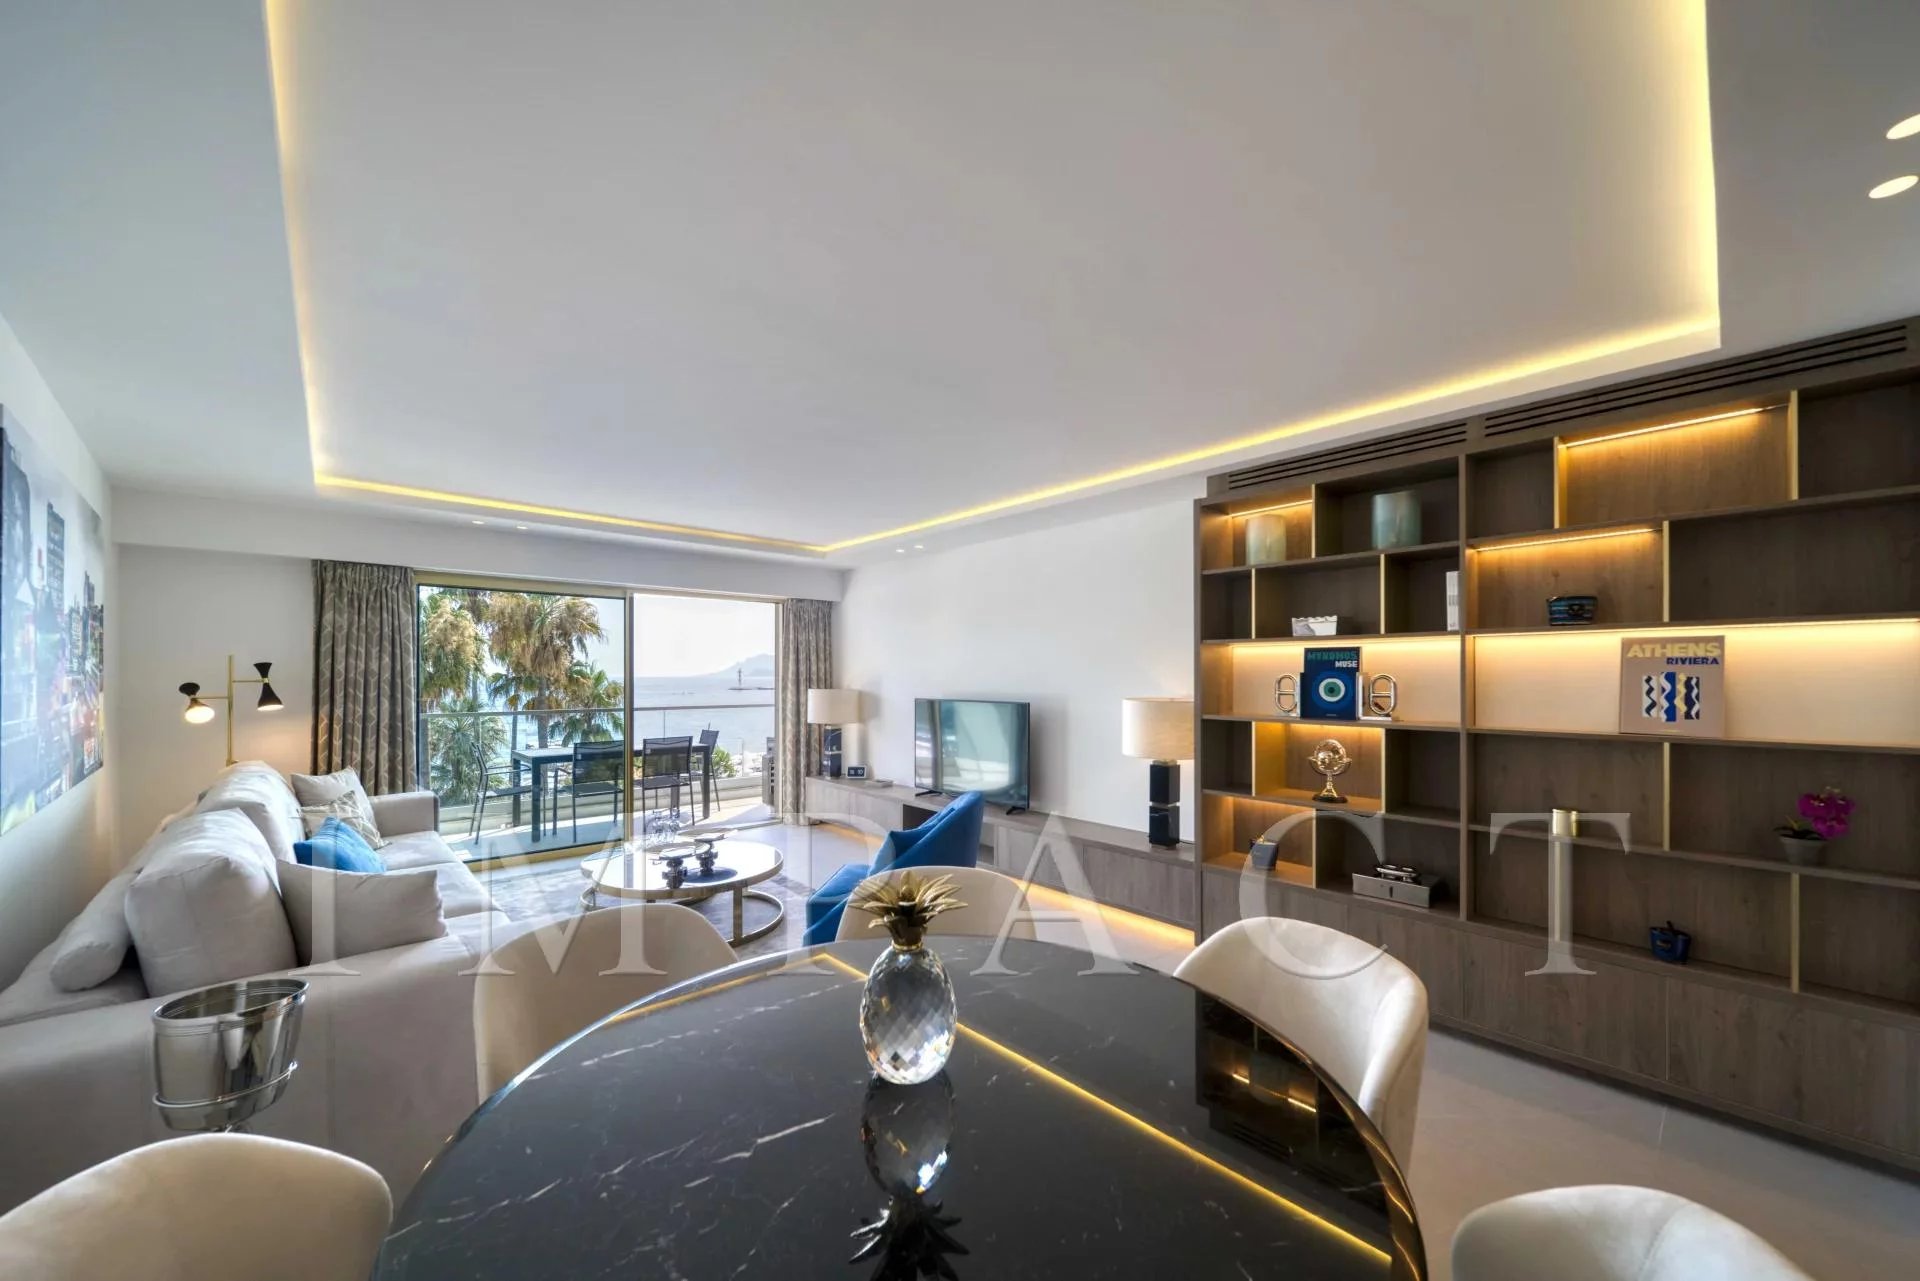 Brand new apartment for rent with sea view, Cannes Croisette